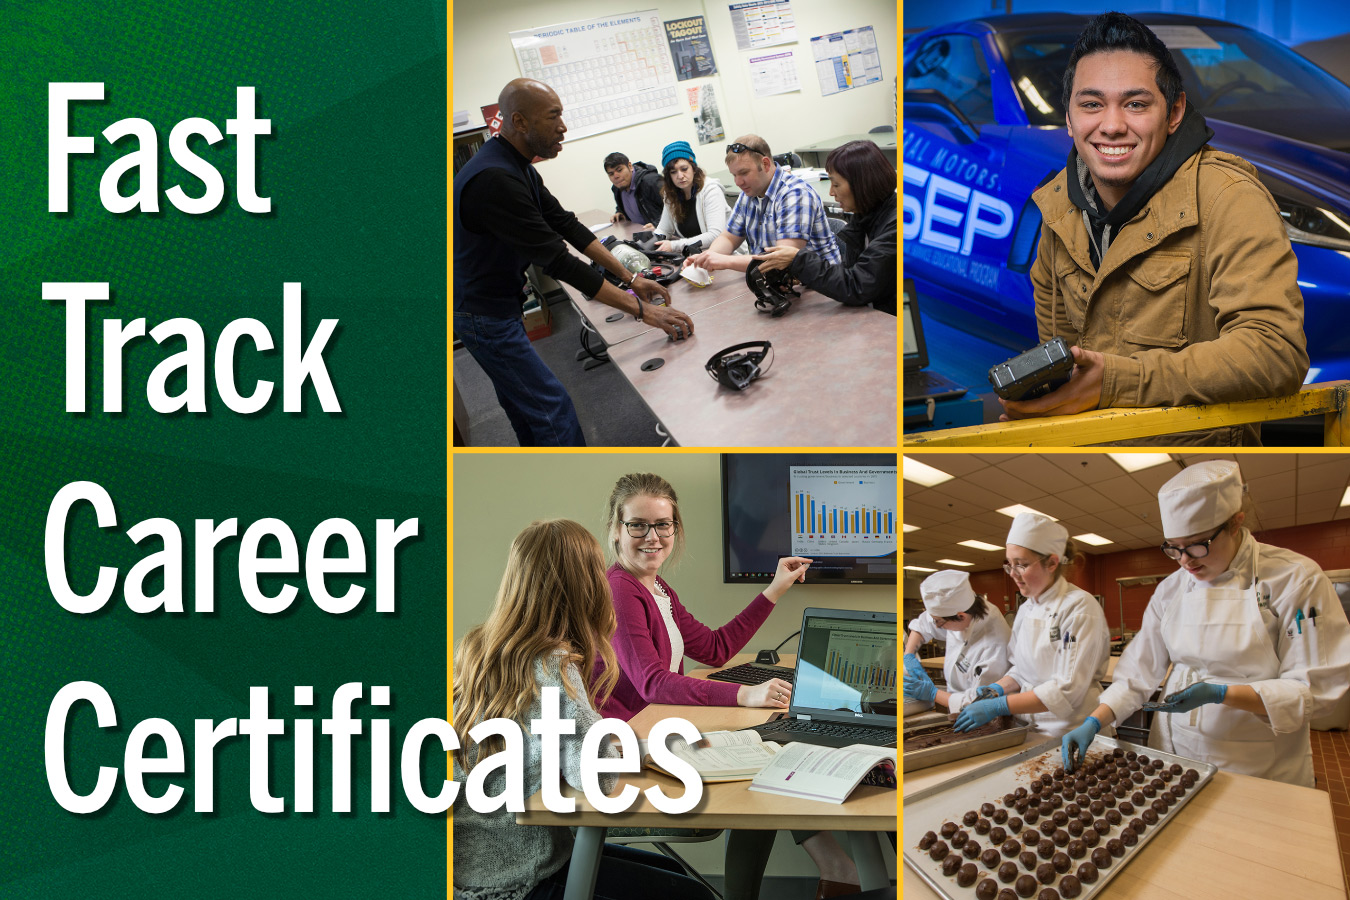 UAA now offering Fast Track Career Ceritificates